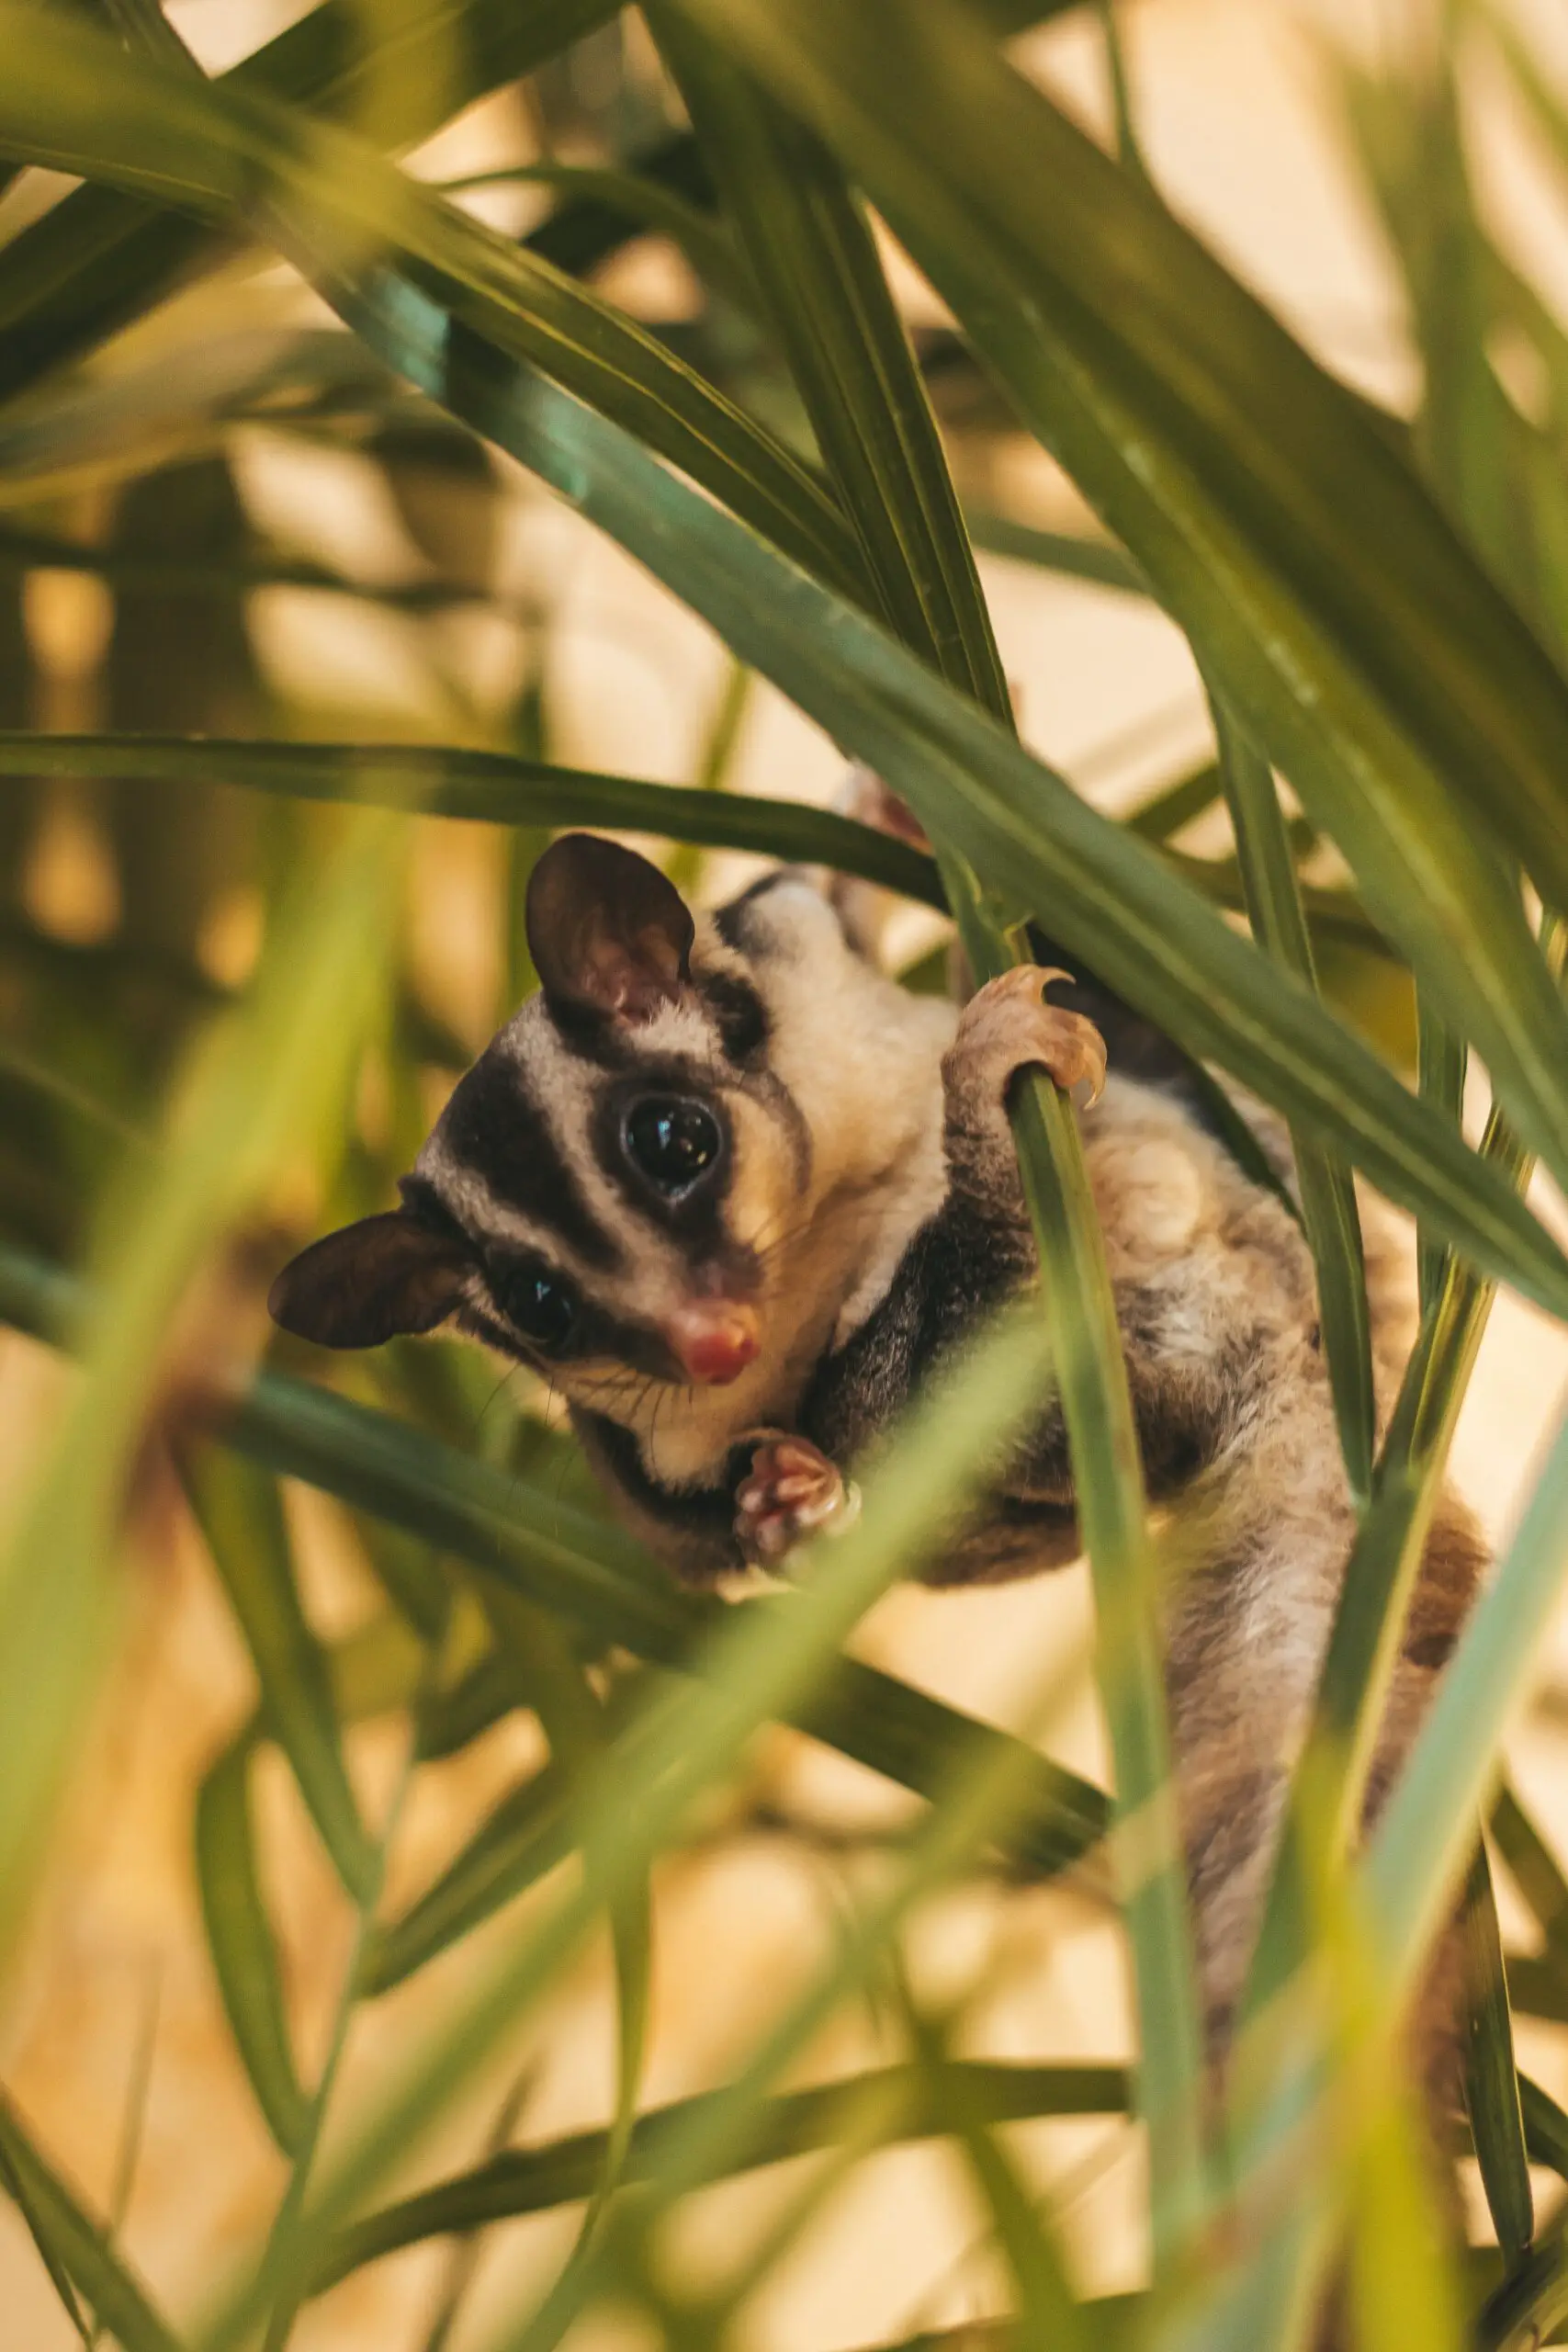 Can Sugar Gliders Mate With Siblings? The Surprising Answer